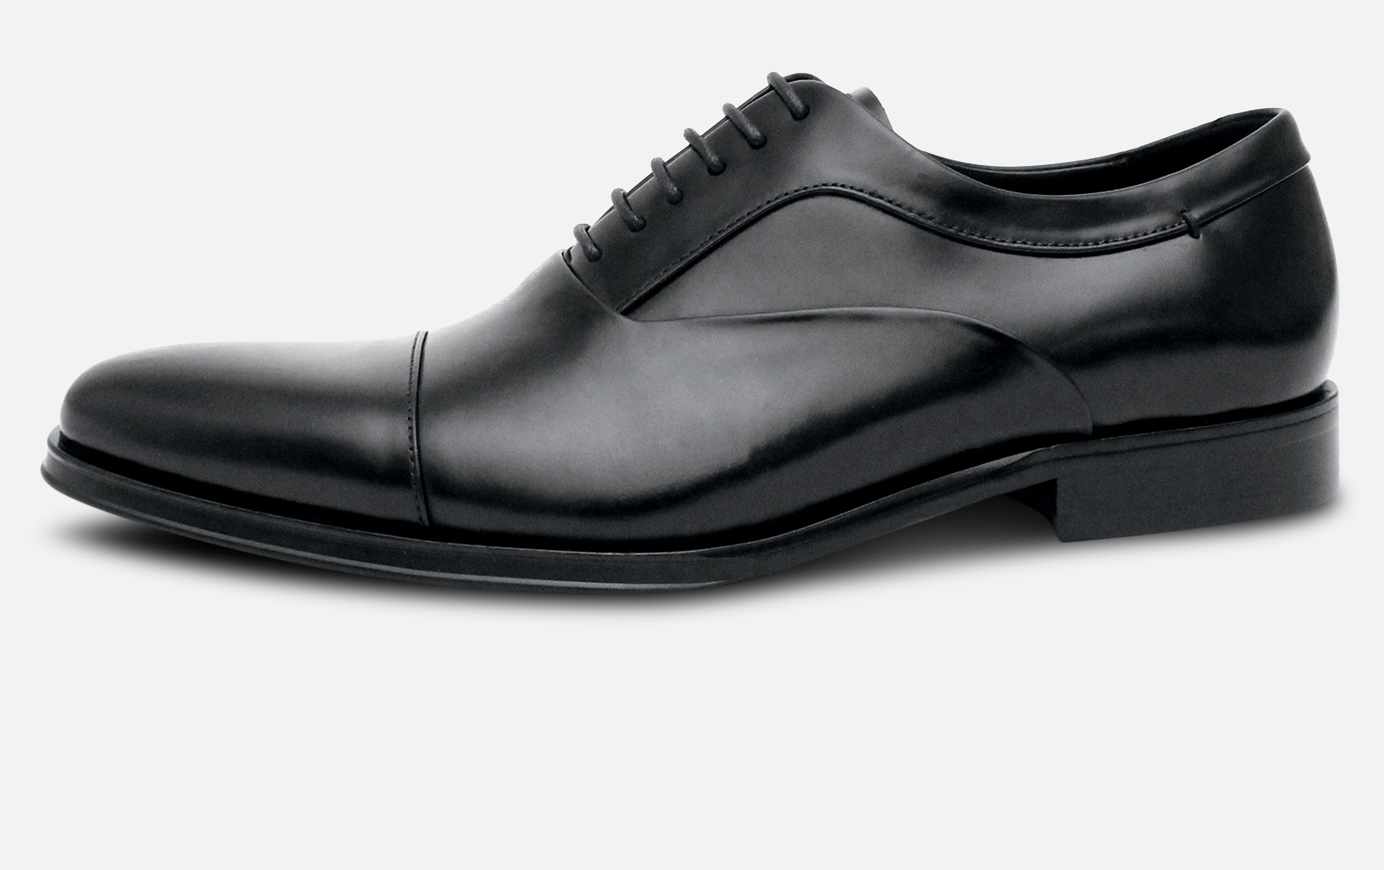 Black Oxford Formal Lace Up Shoes by John White